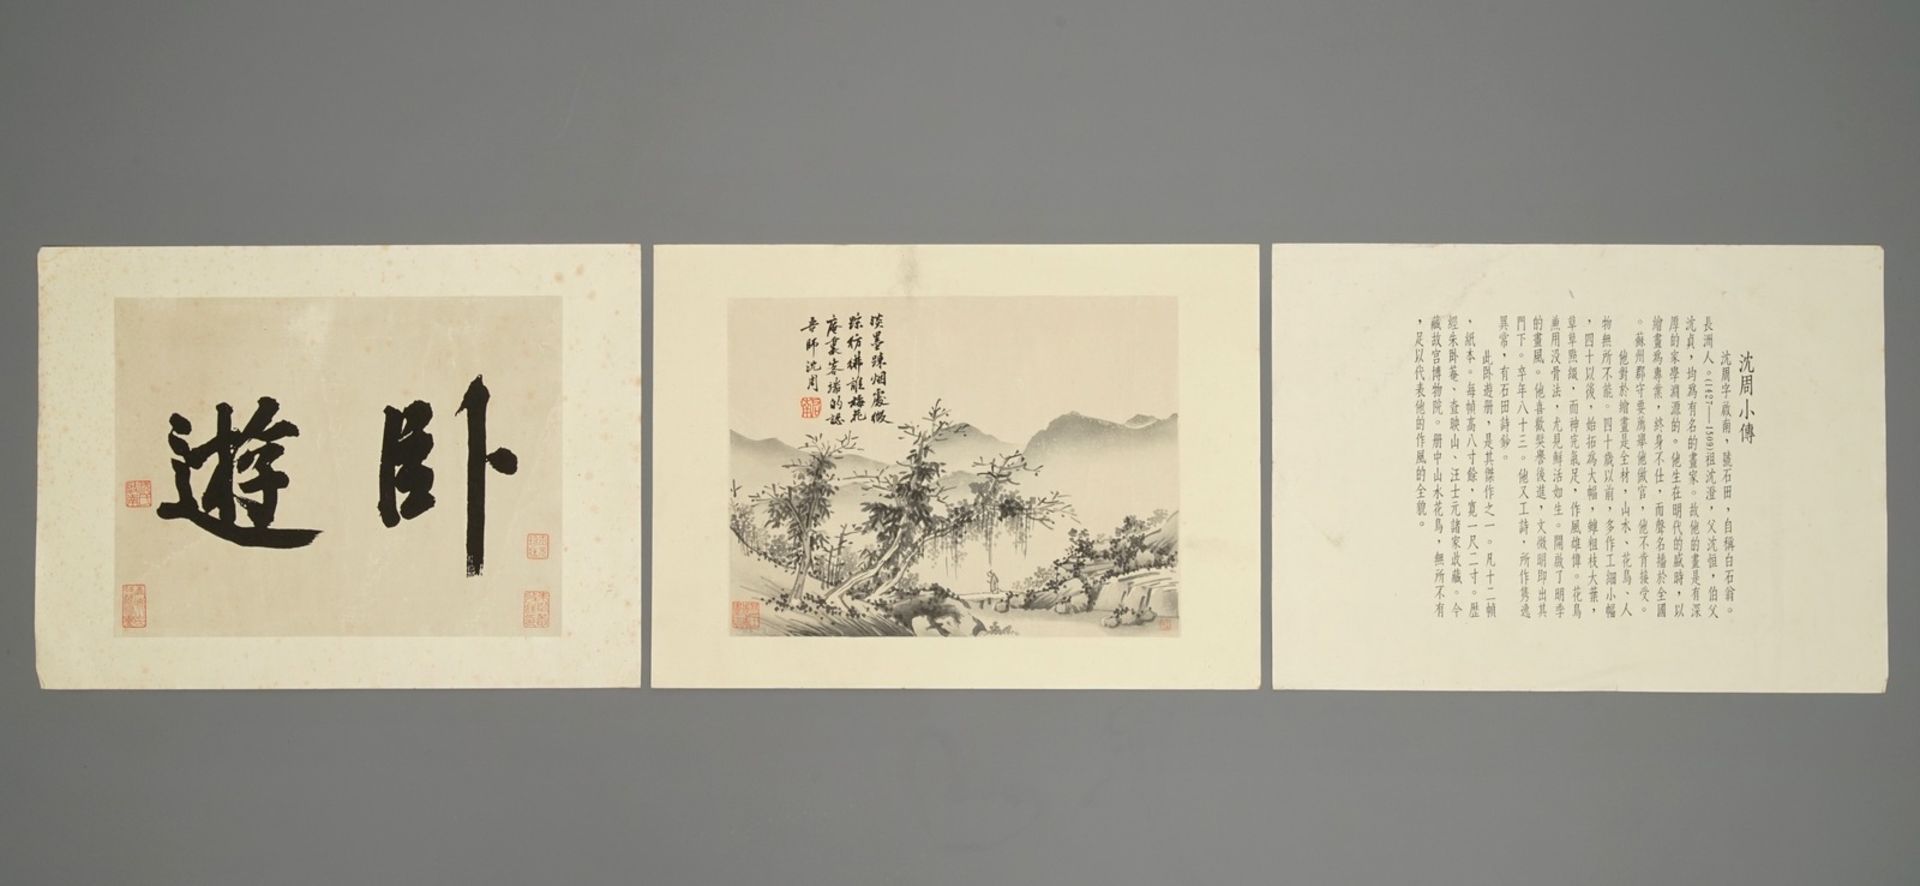 Ten lithographic prints after an album by Shen Zhou (1427-1509), China, 1st half 20th C. - Image 3 of 5